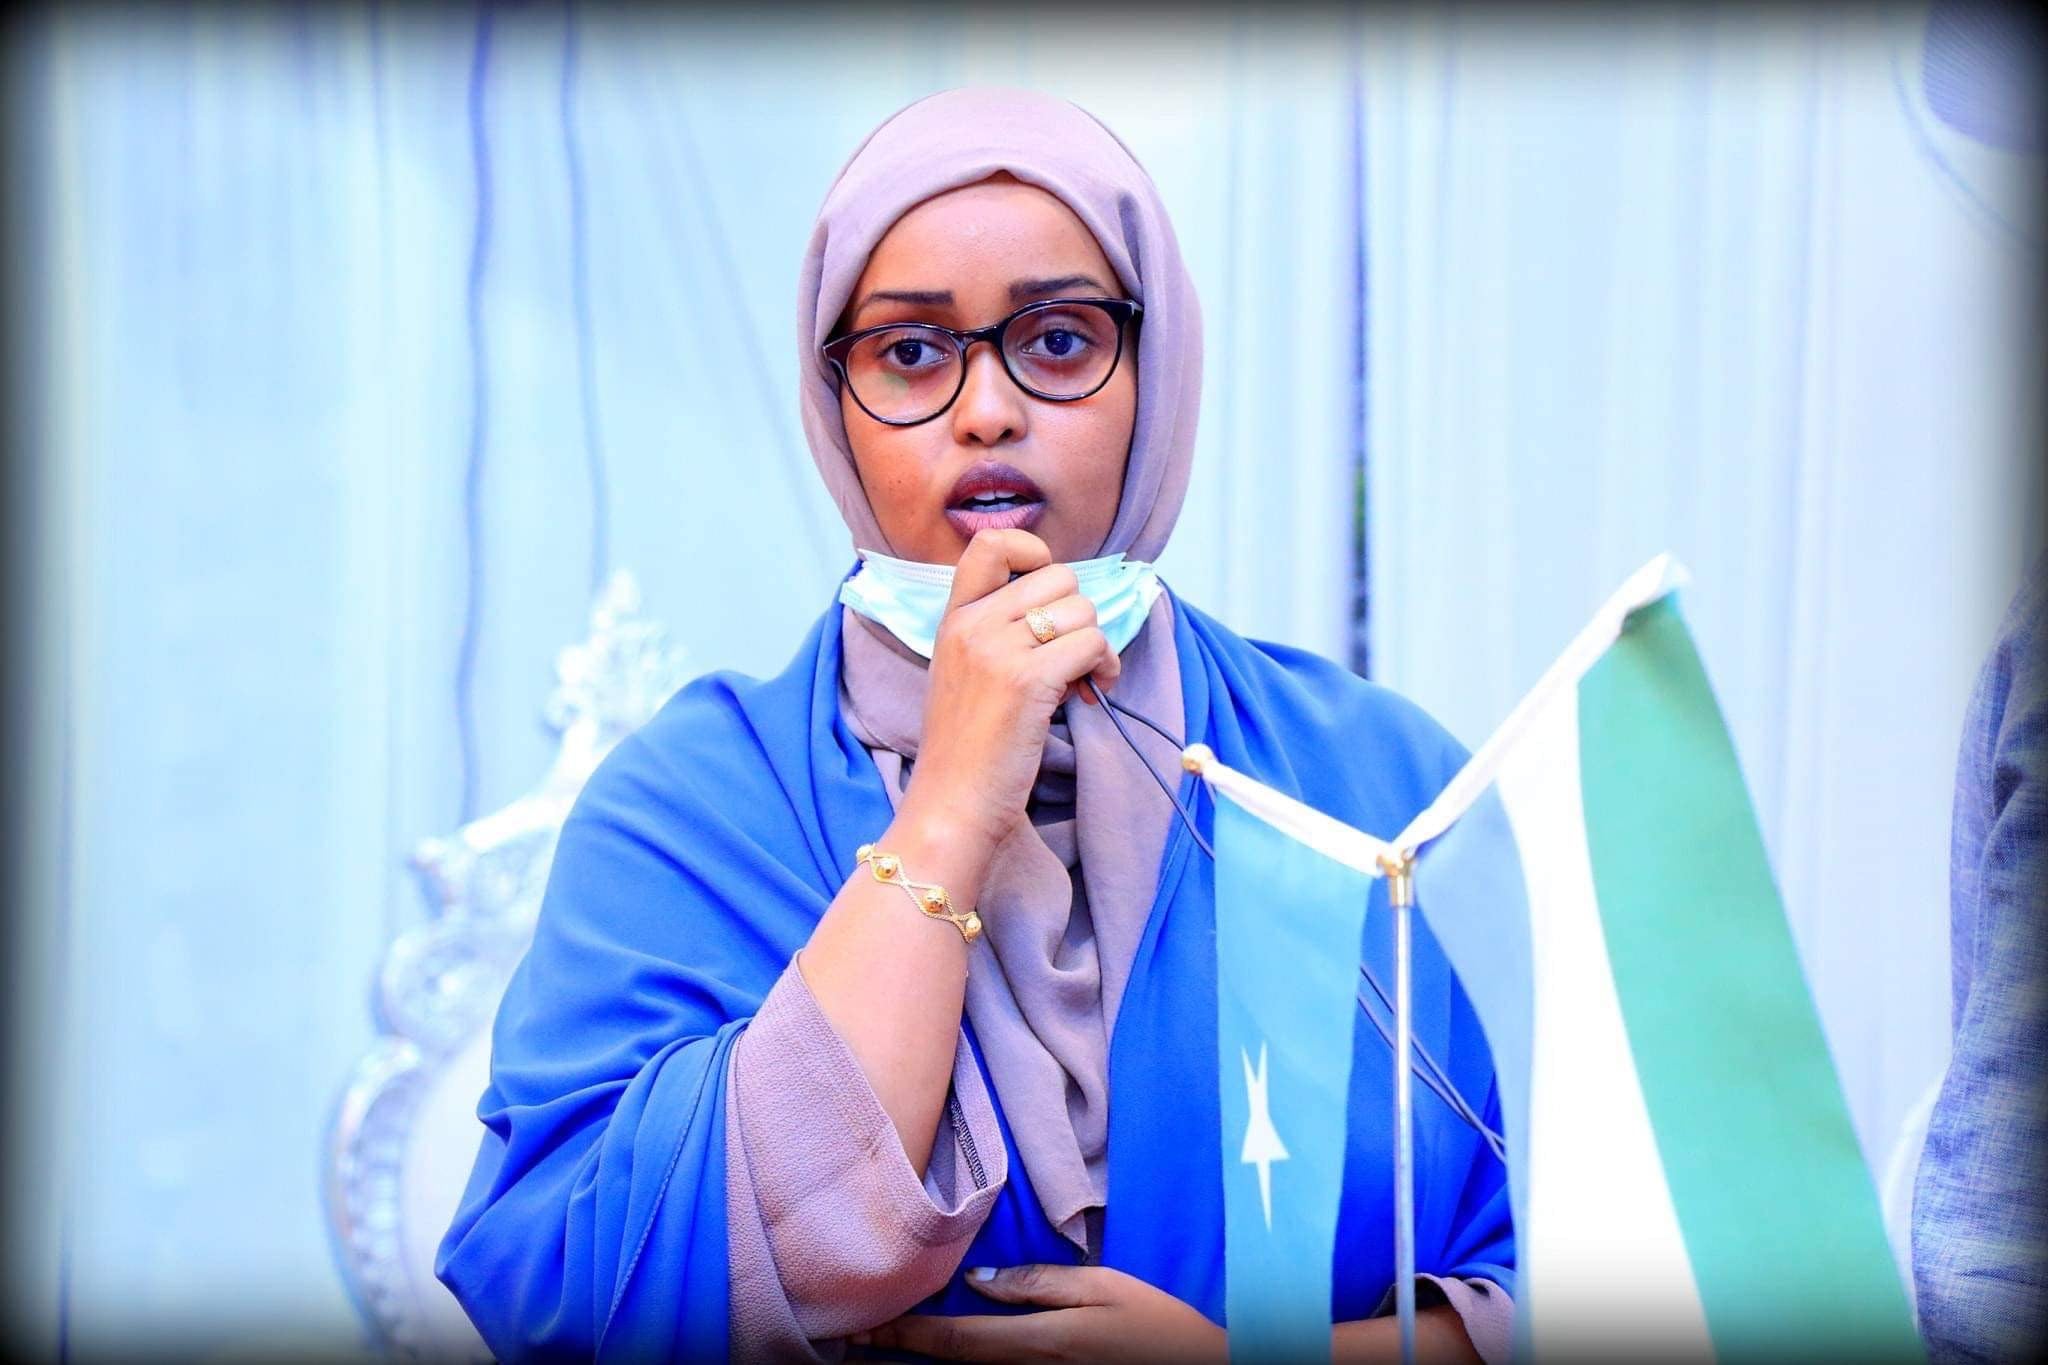 A young Somali woman wearing a purple veil, round black glasses and a blue jacket gives a speech